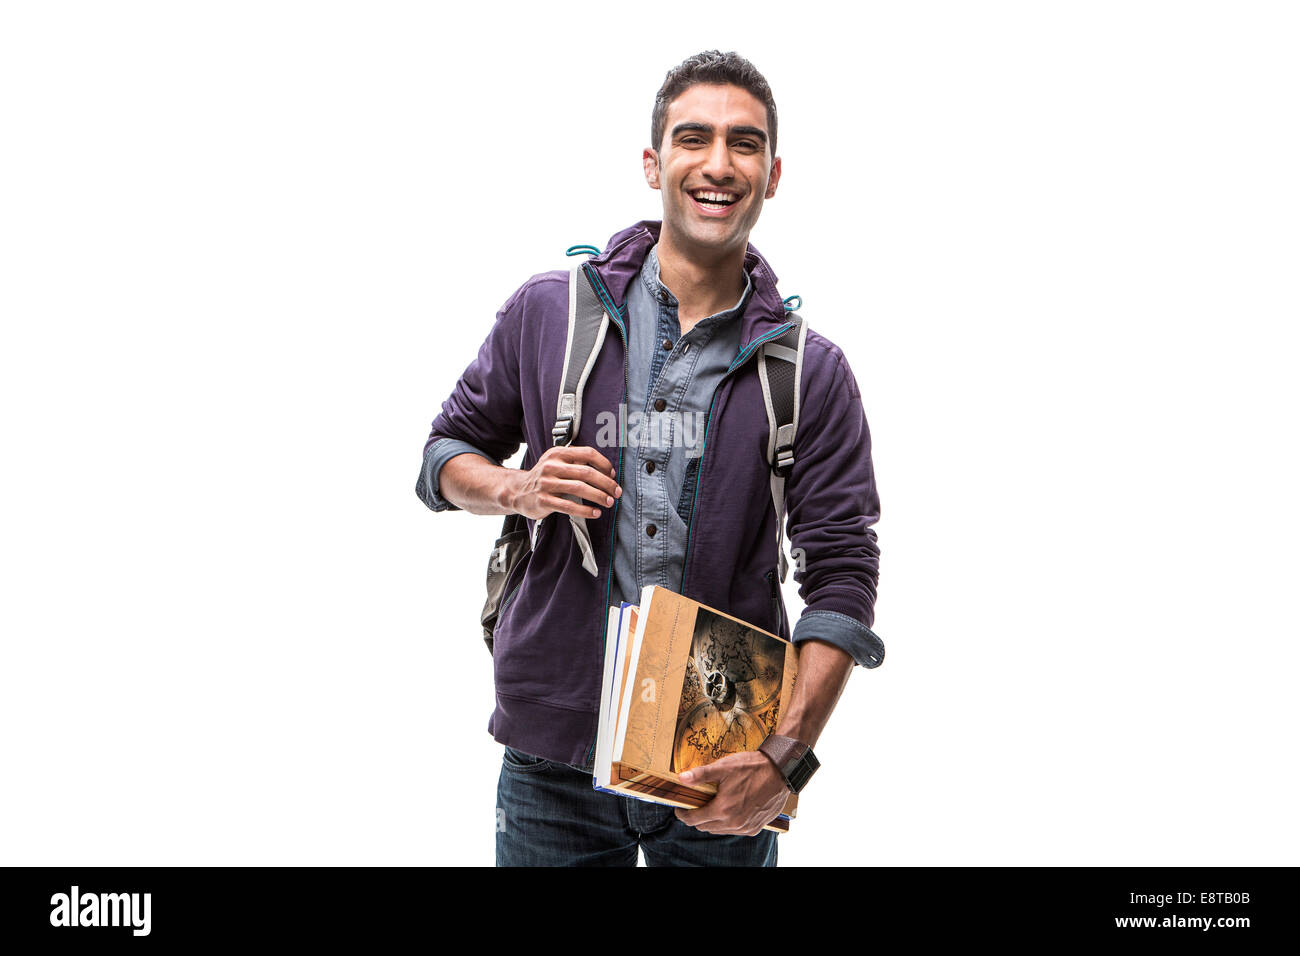 Indian student carrying books and backpack Stock Photo